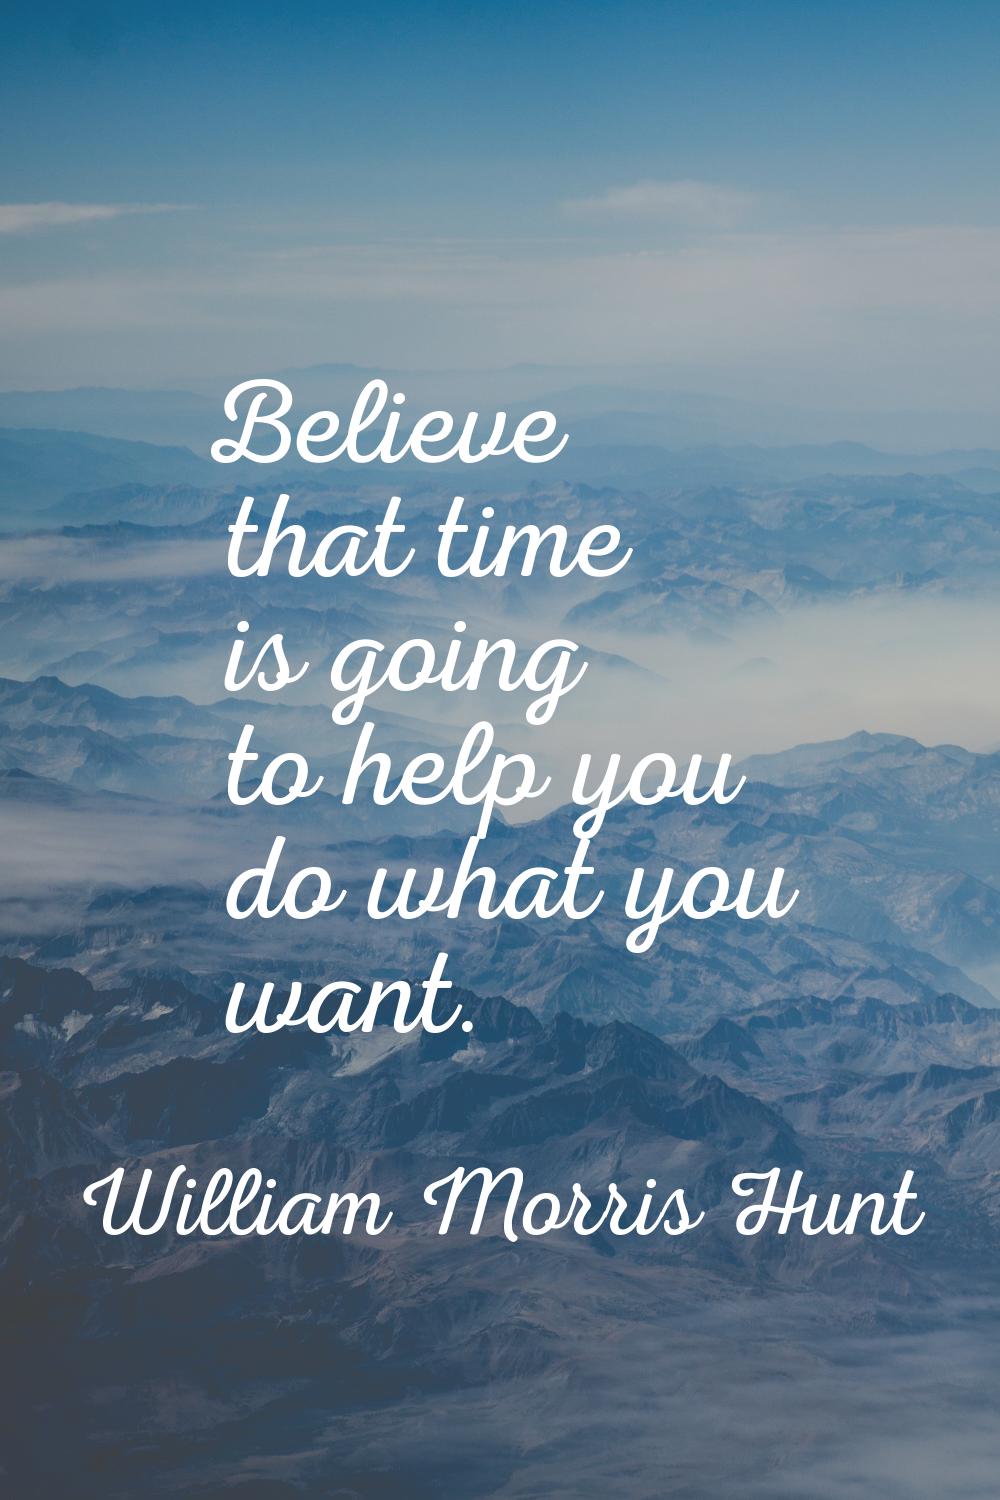 Believe that time is going to help you do what you want.